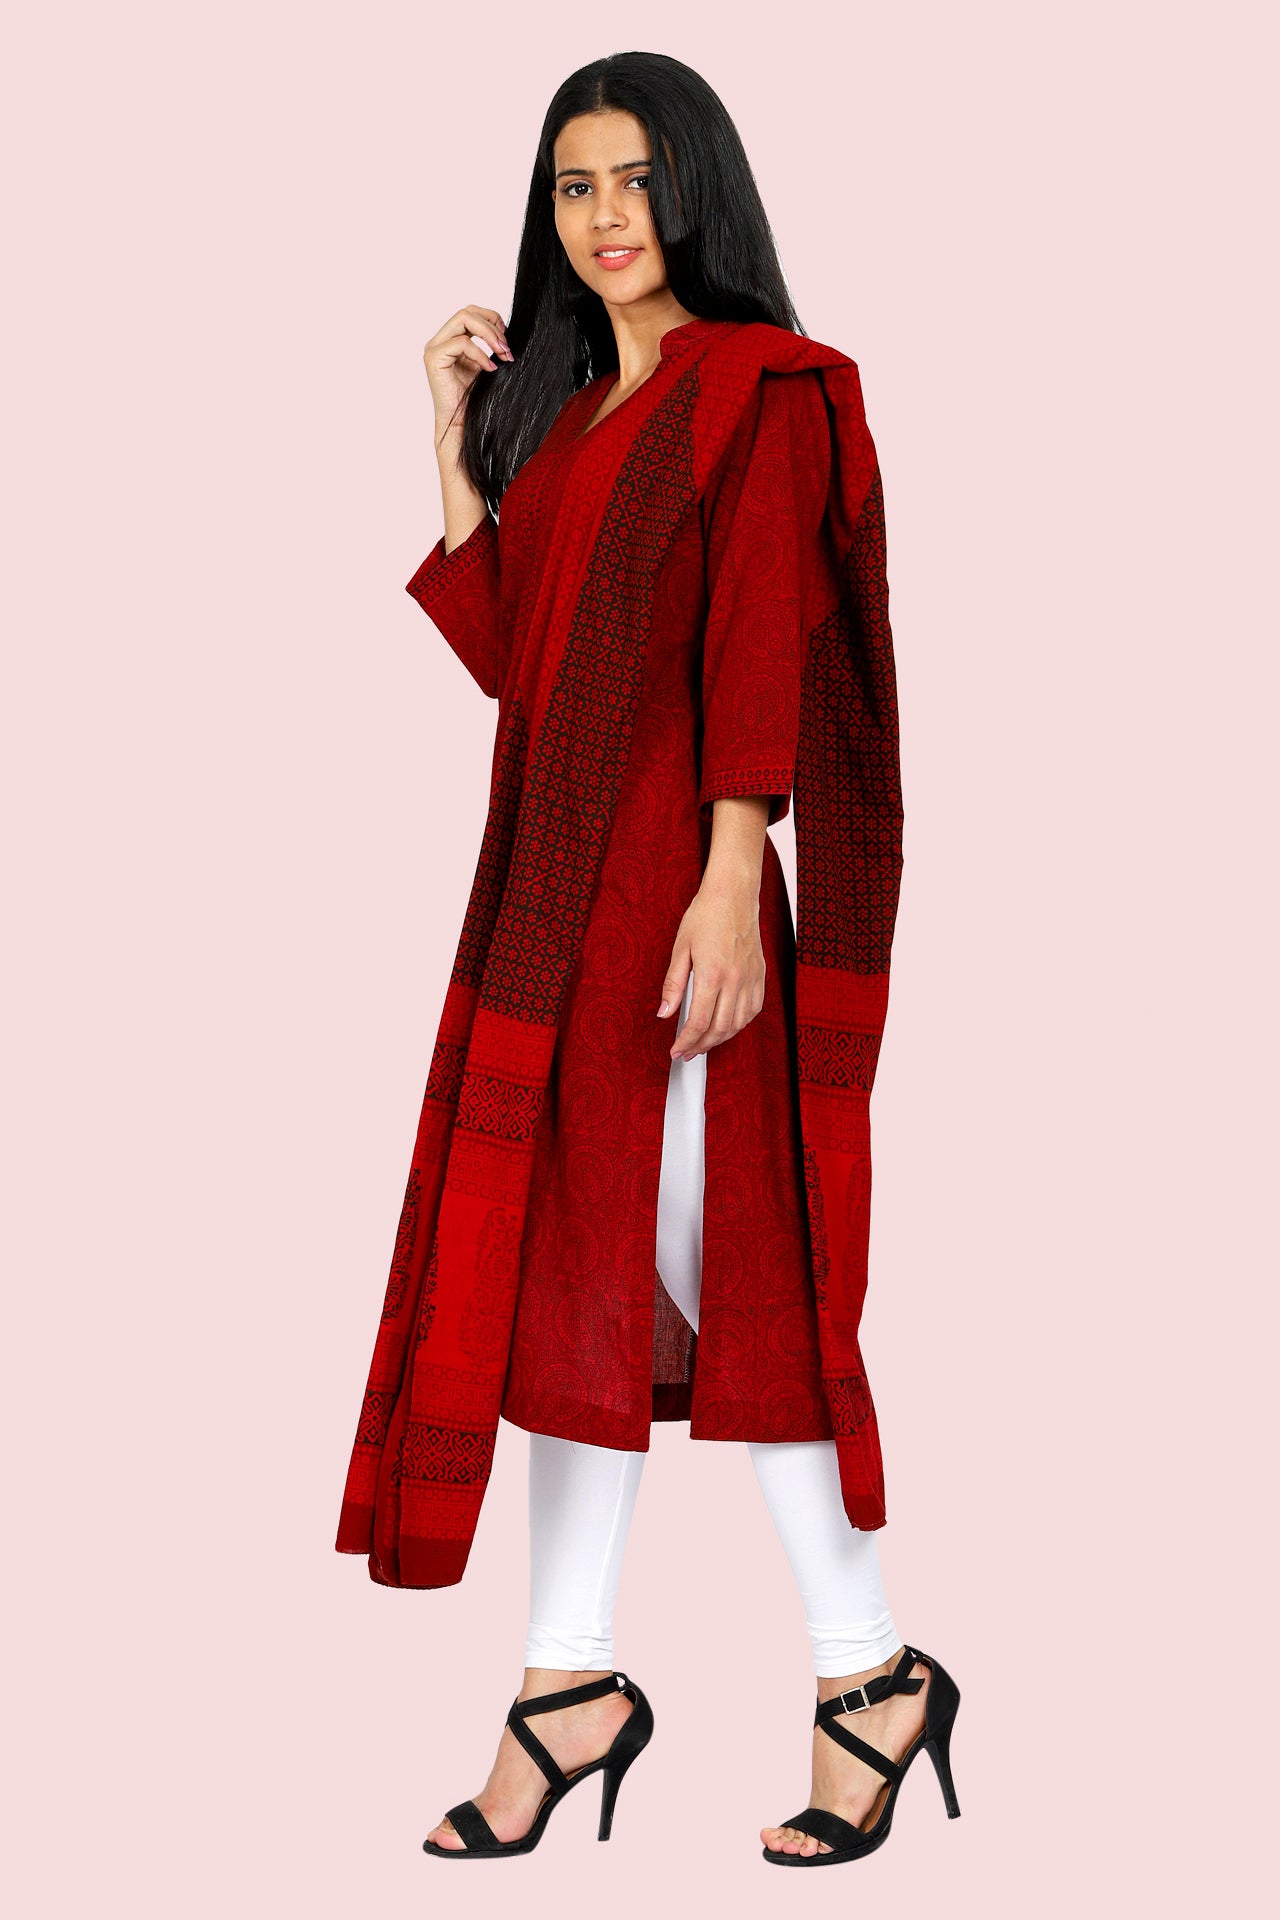 AMODINI BAGH PRINT NATURAL DYED MAROON AND BLACK PURE COTTON DUPATTA